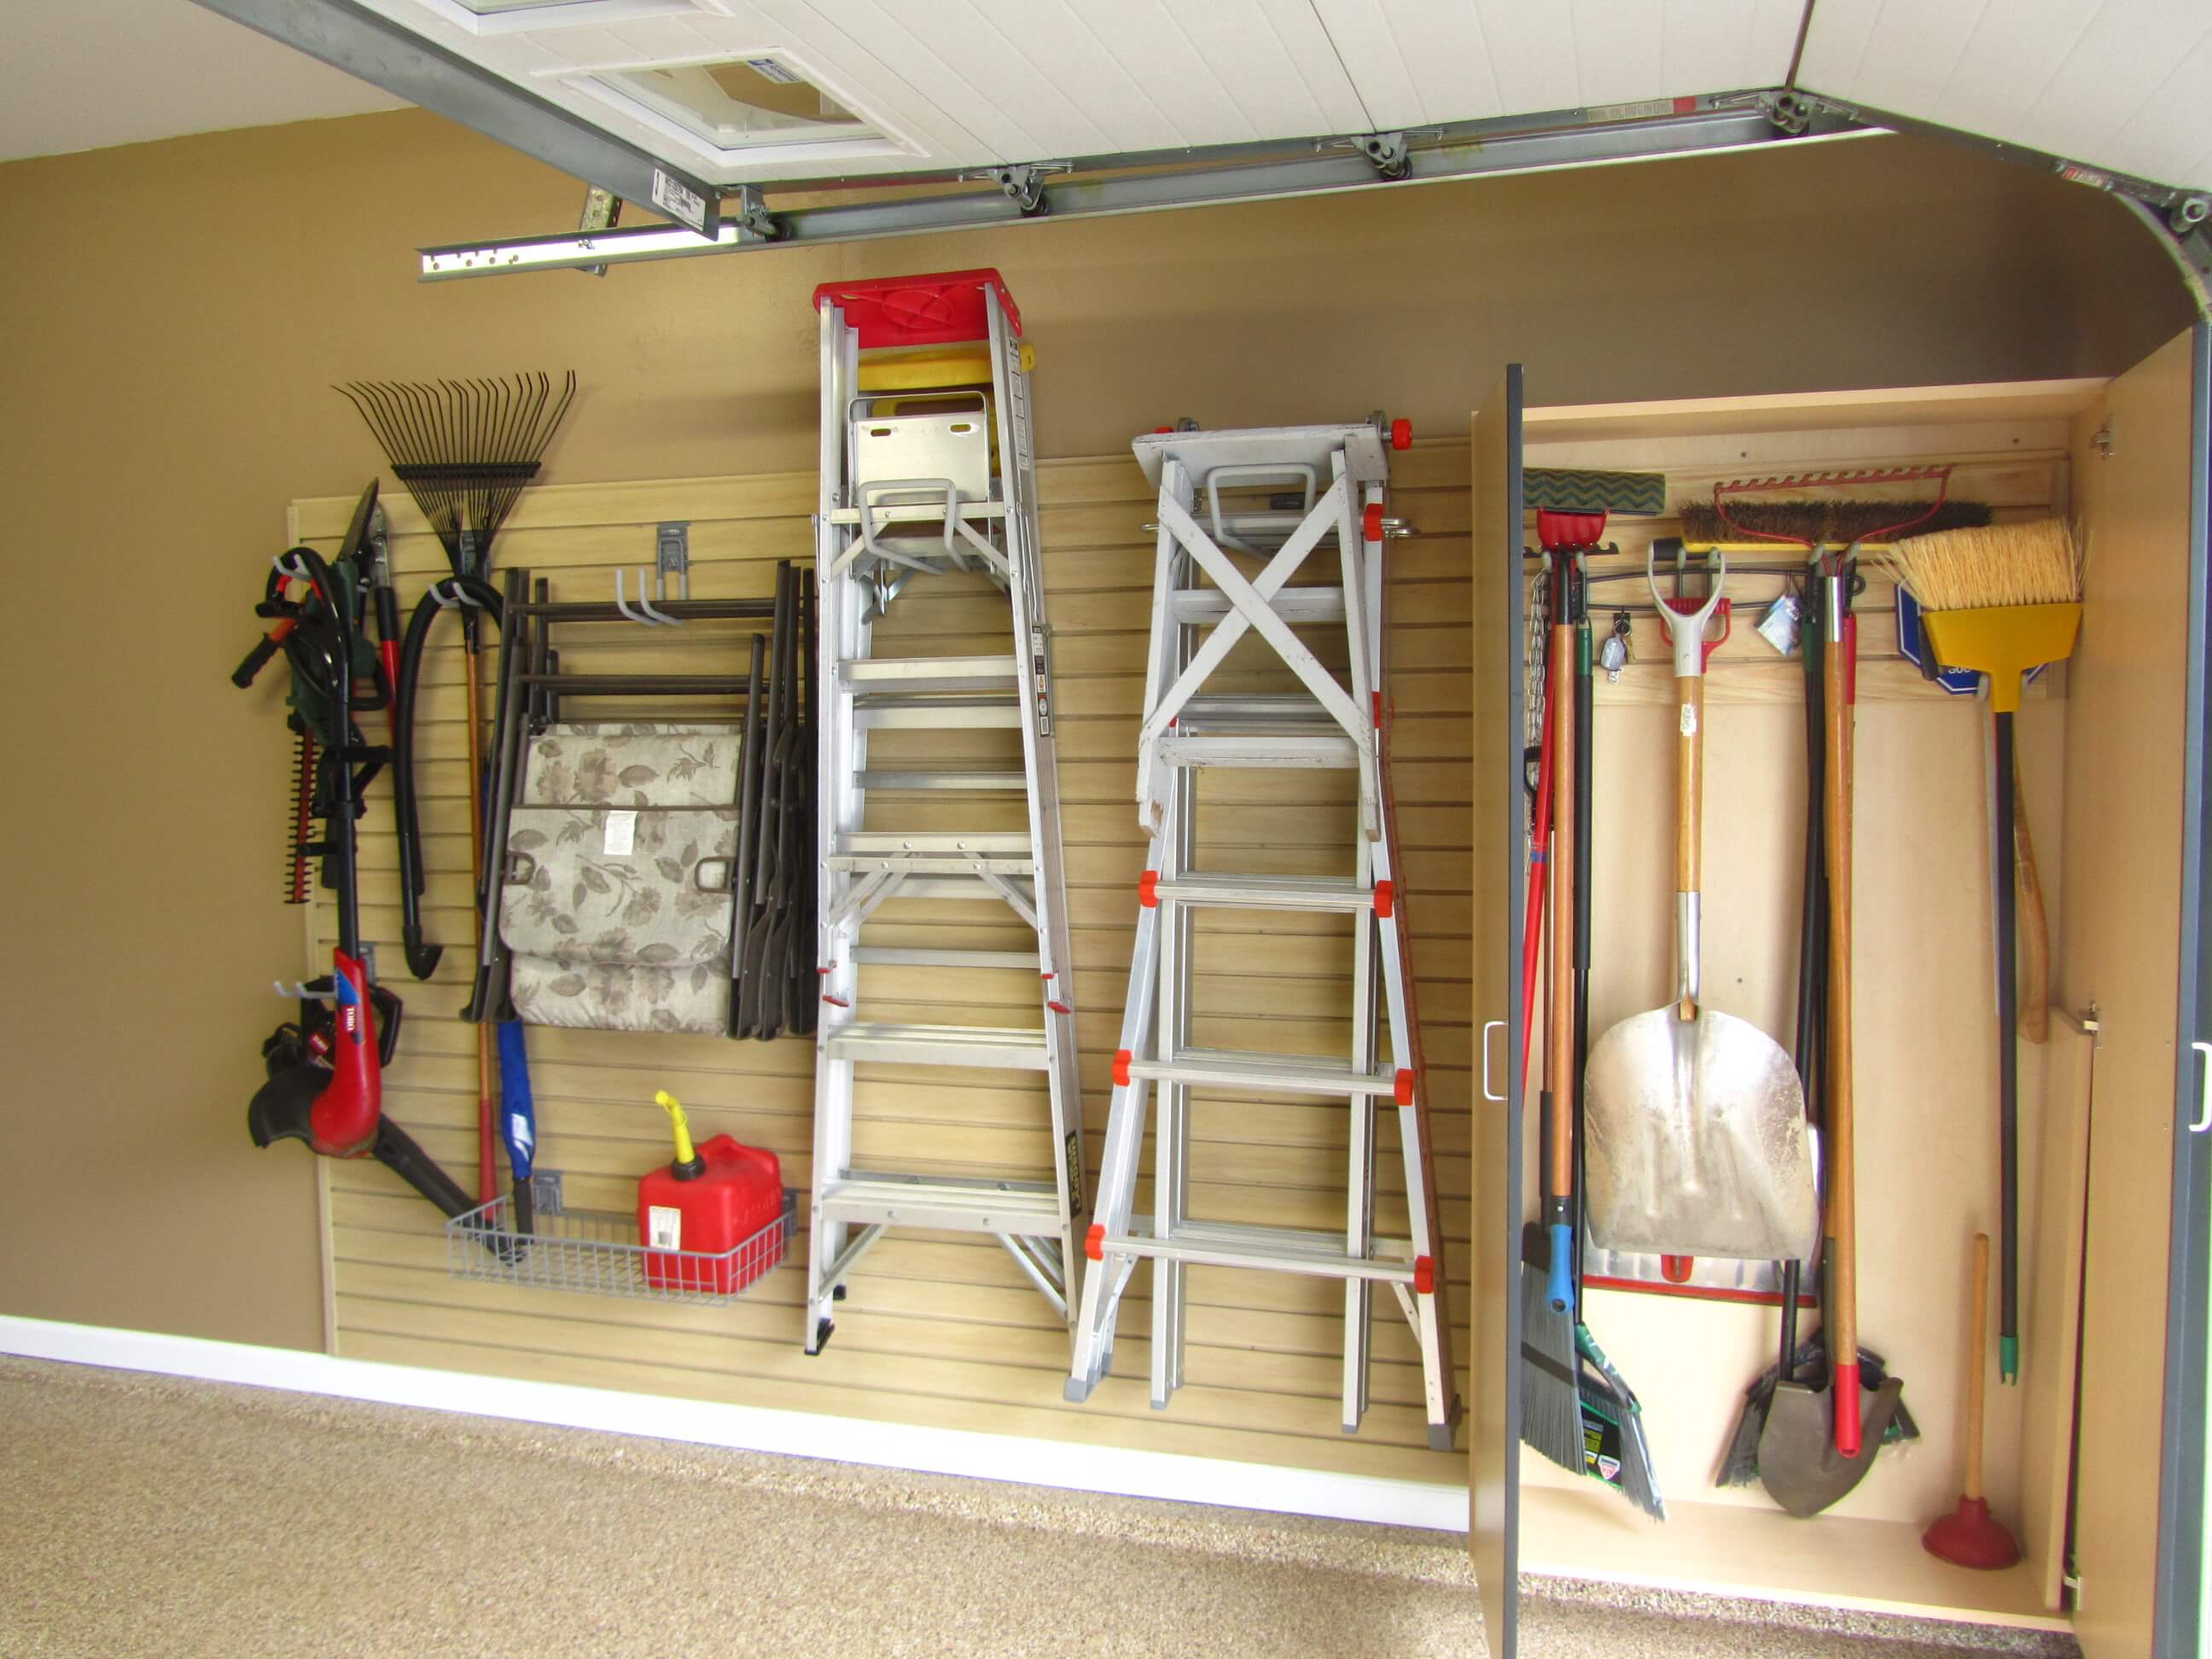 No Tool Shed Required Garage Layout